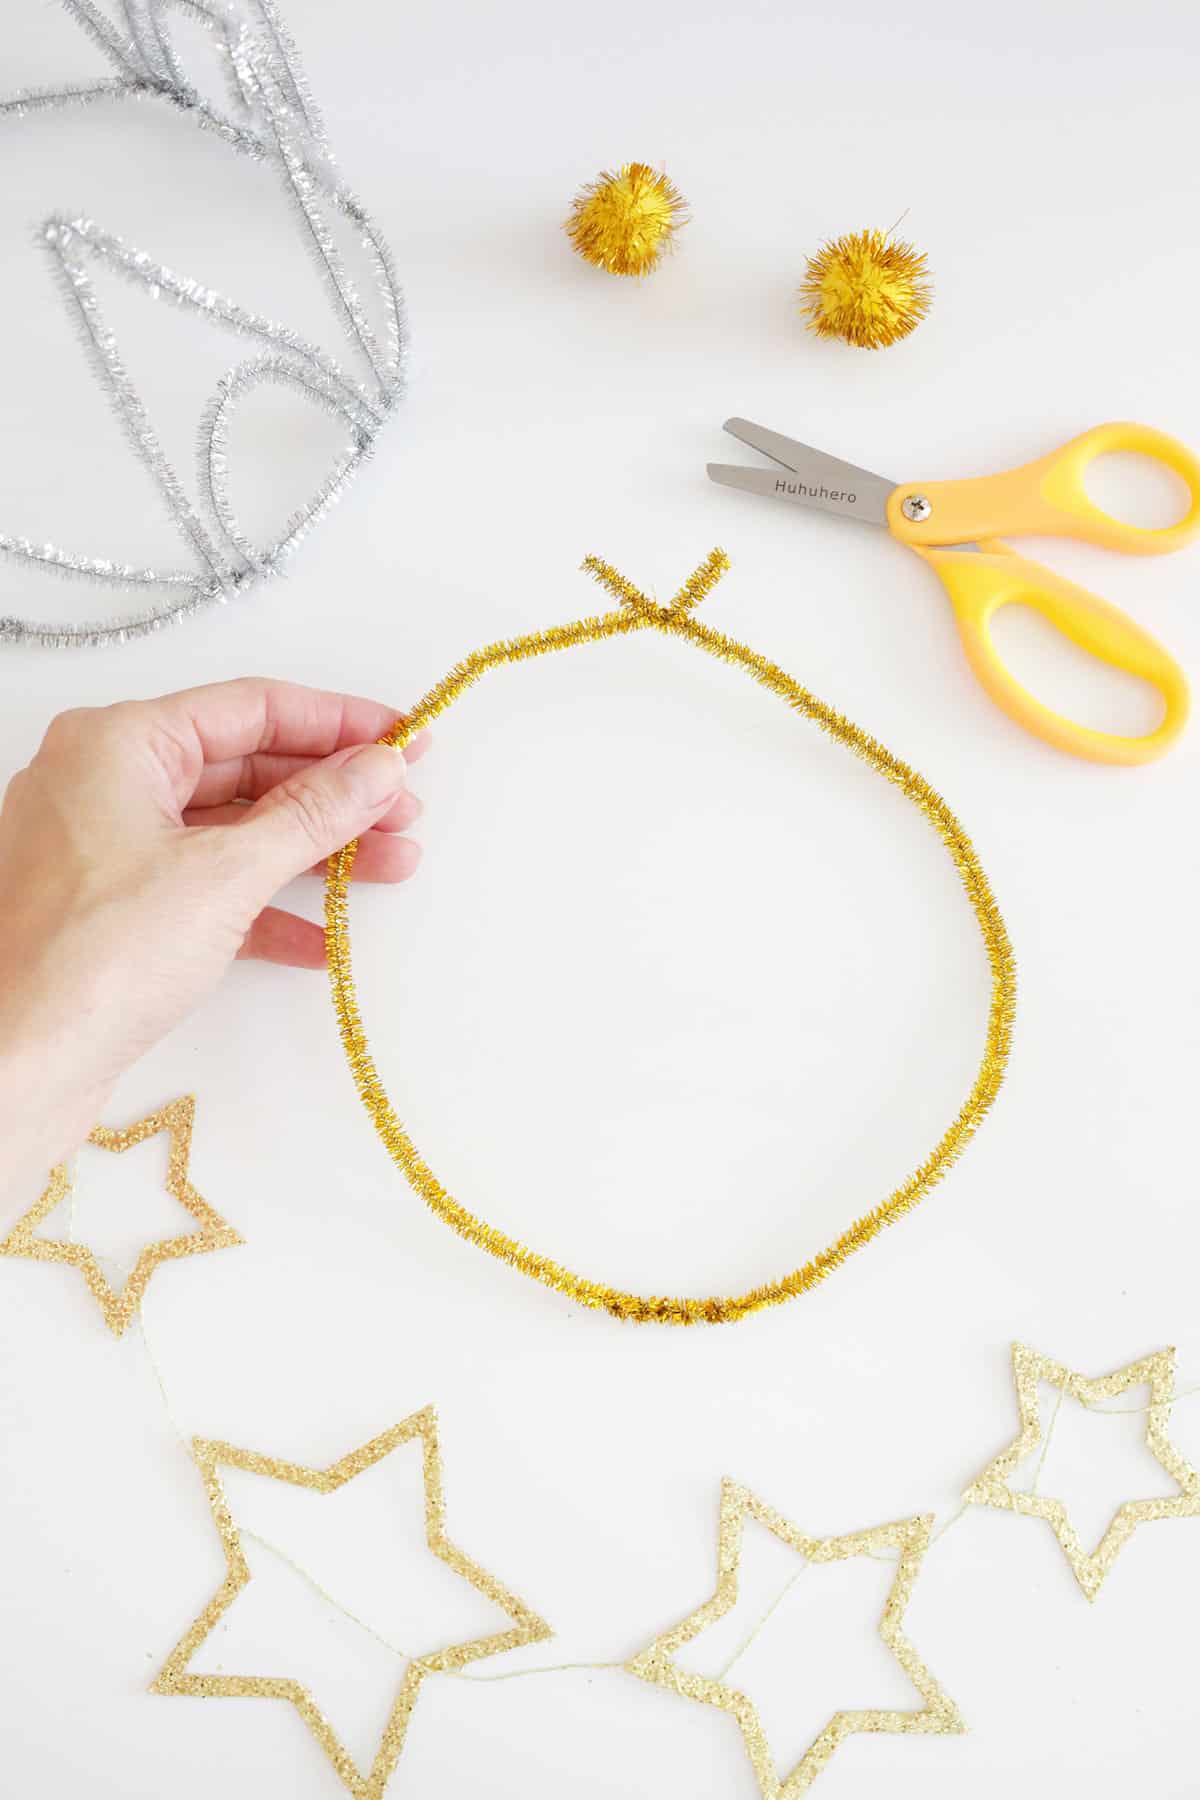 twisting a pipe cleaner into a crown